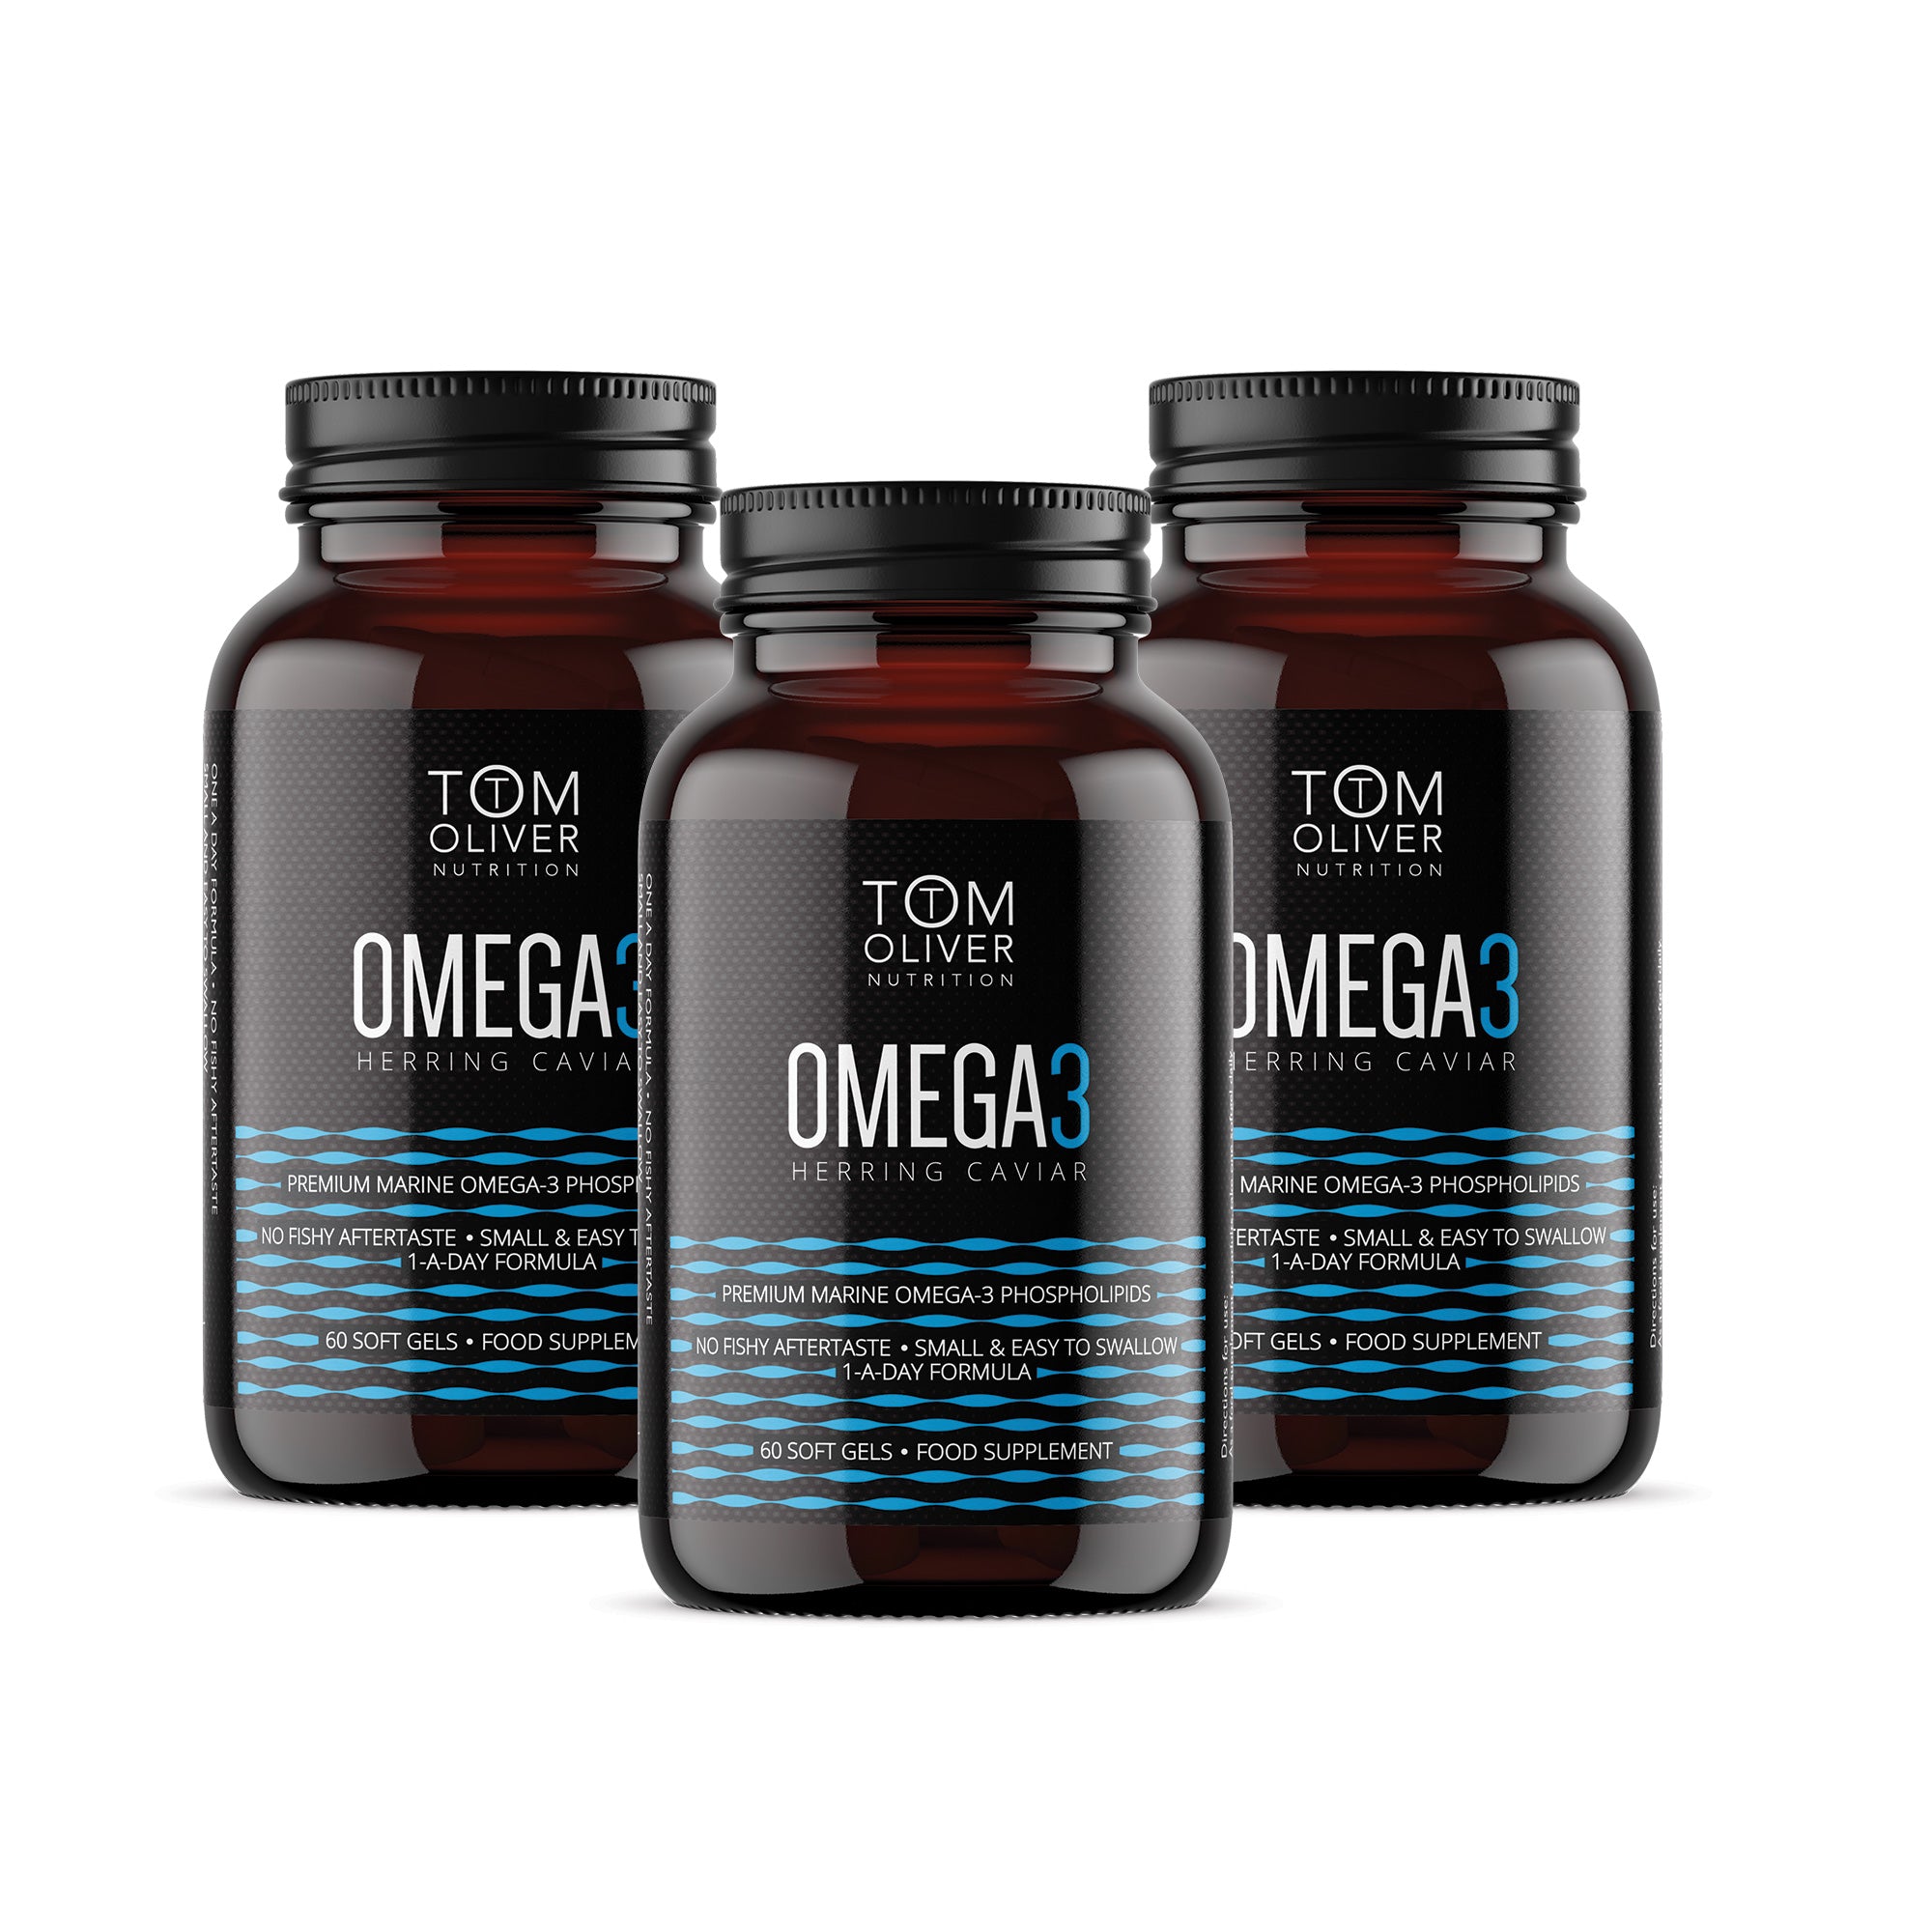 L'OMEGA 3 HERRING Caviar Offre Pack (3 bouteilles)